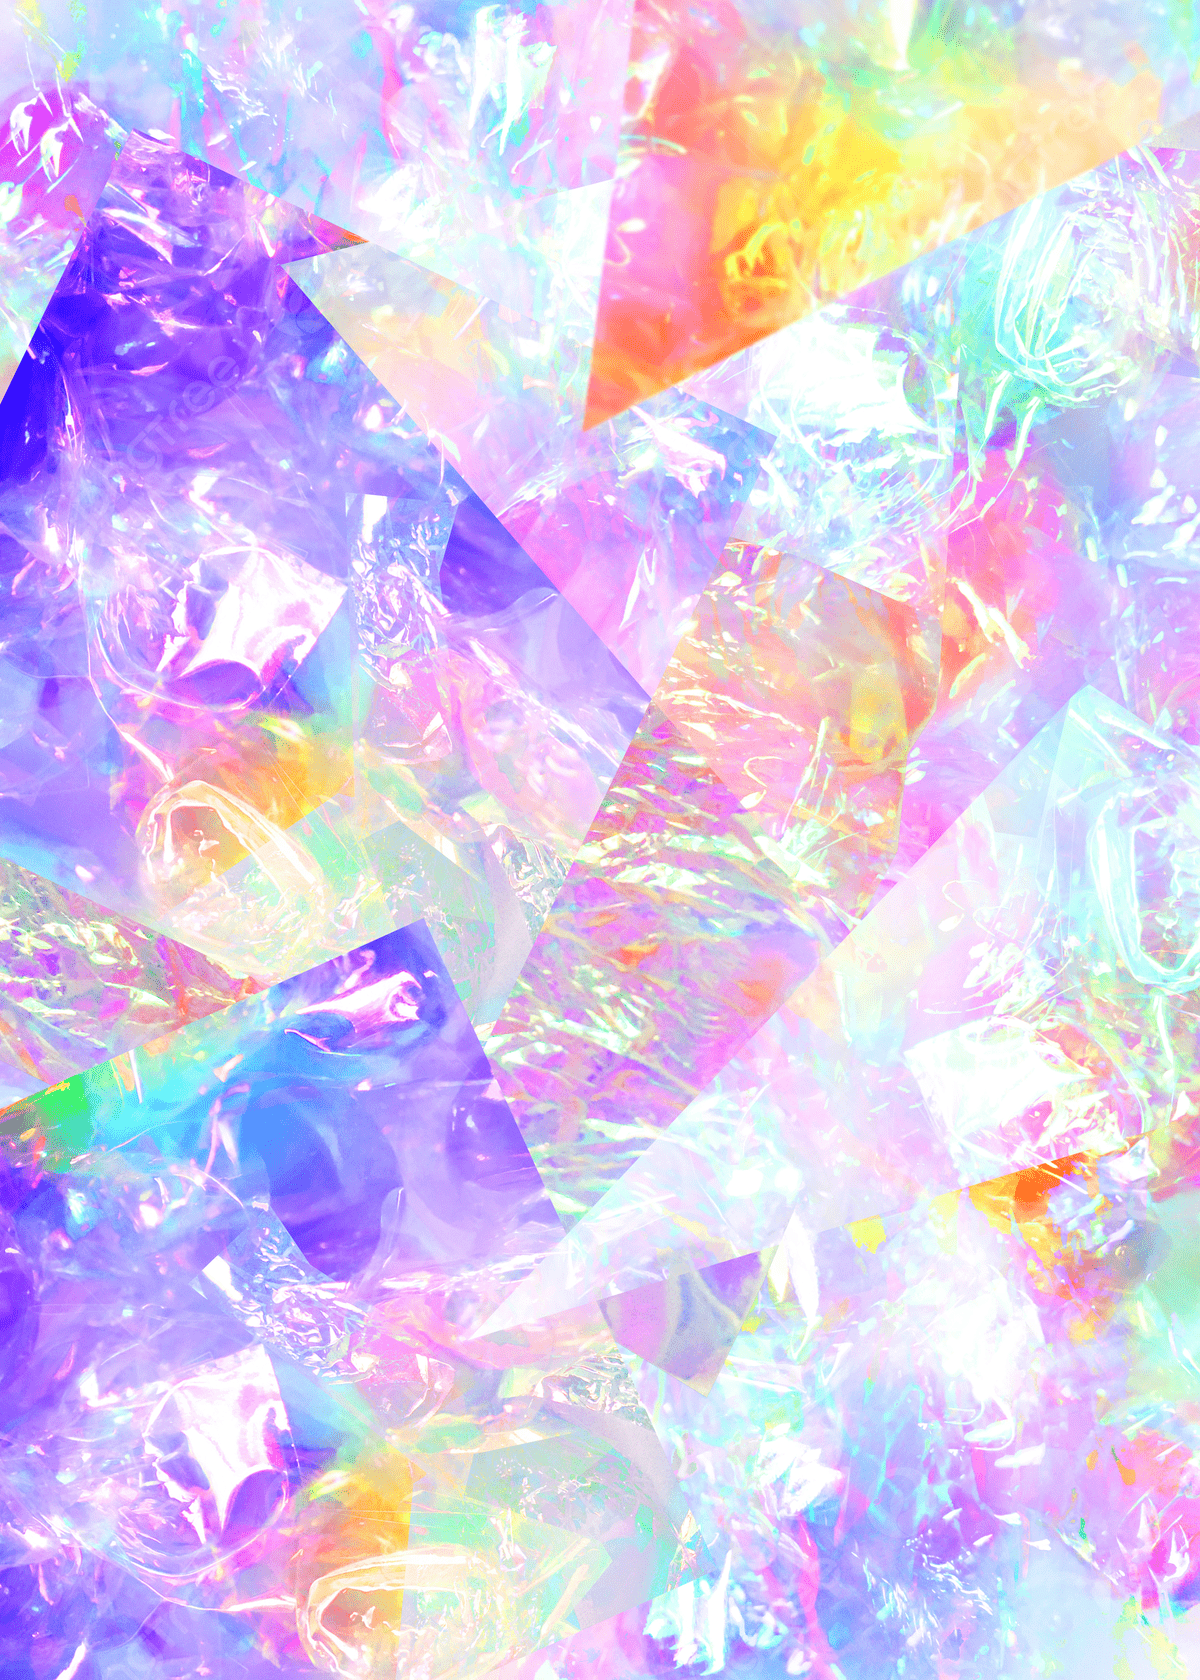 A digital artwork featuring a rainbow of pastel colors. - Holographic